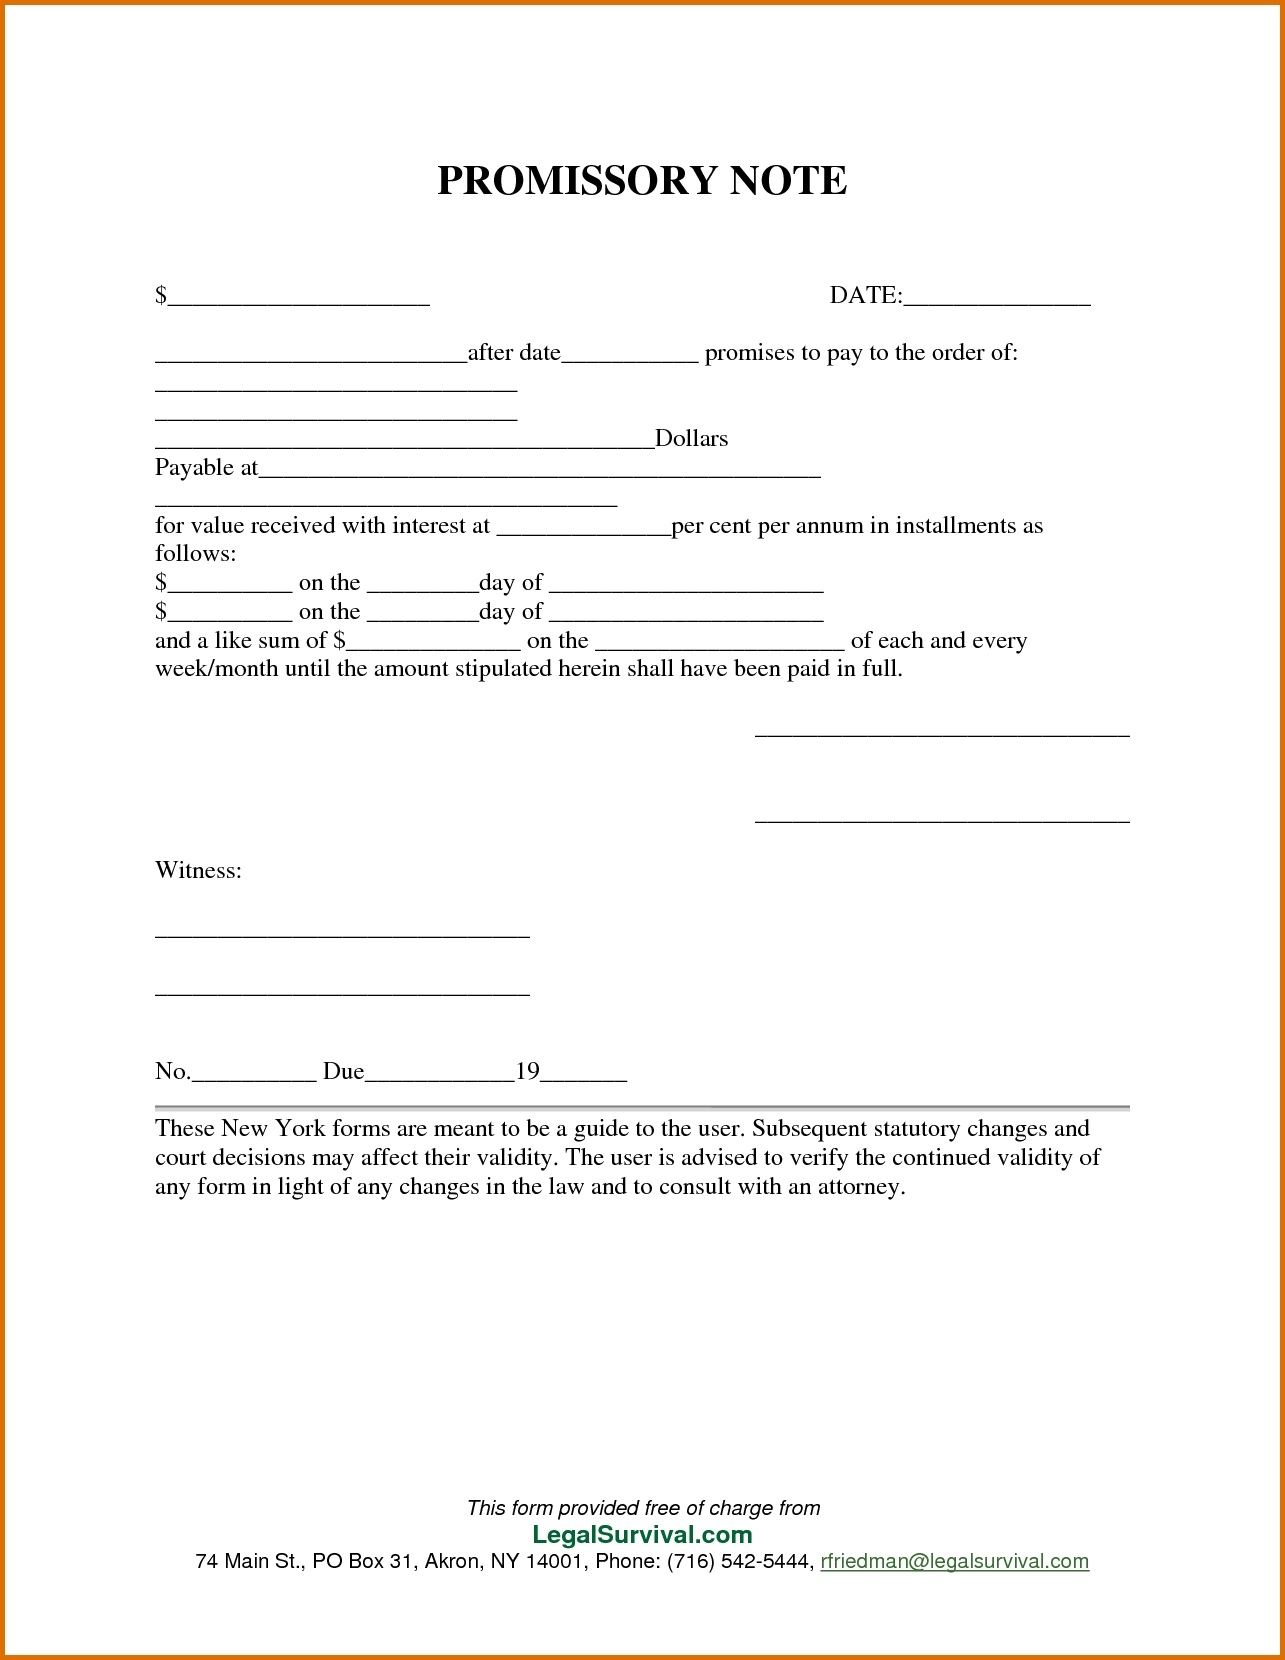 Free Promissory Note Template For Personal Loan Unsecured Agreement - Free Printable Promissory Note For Personal Loan